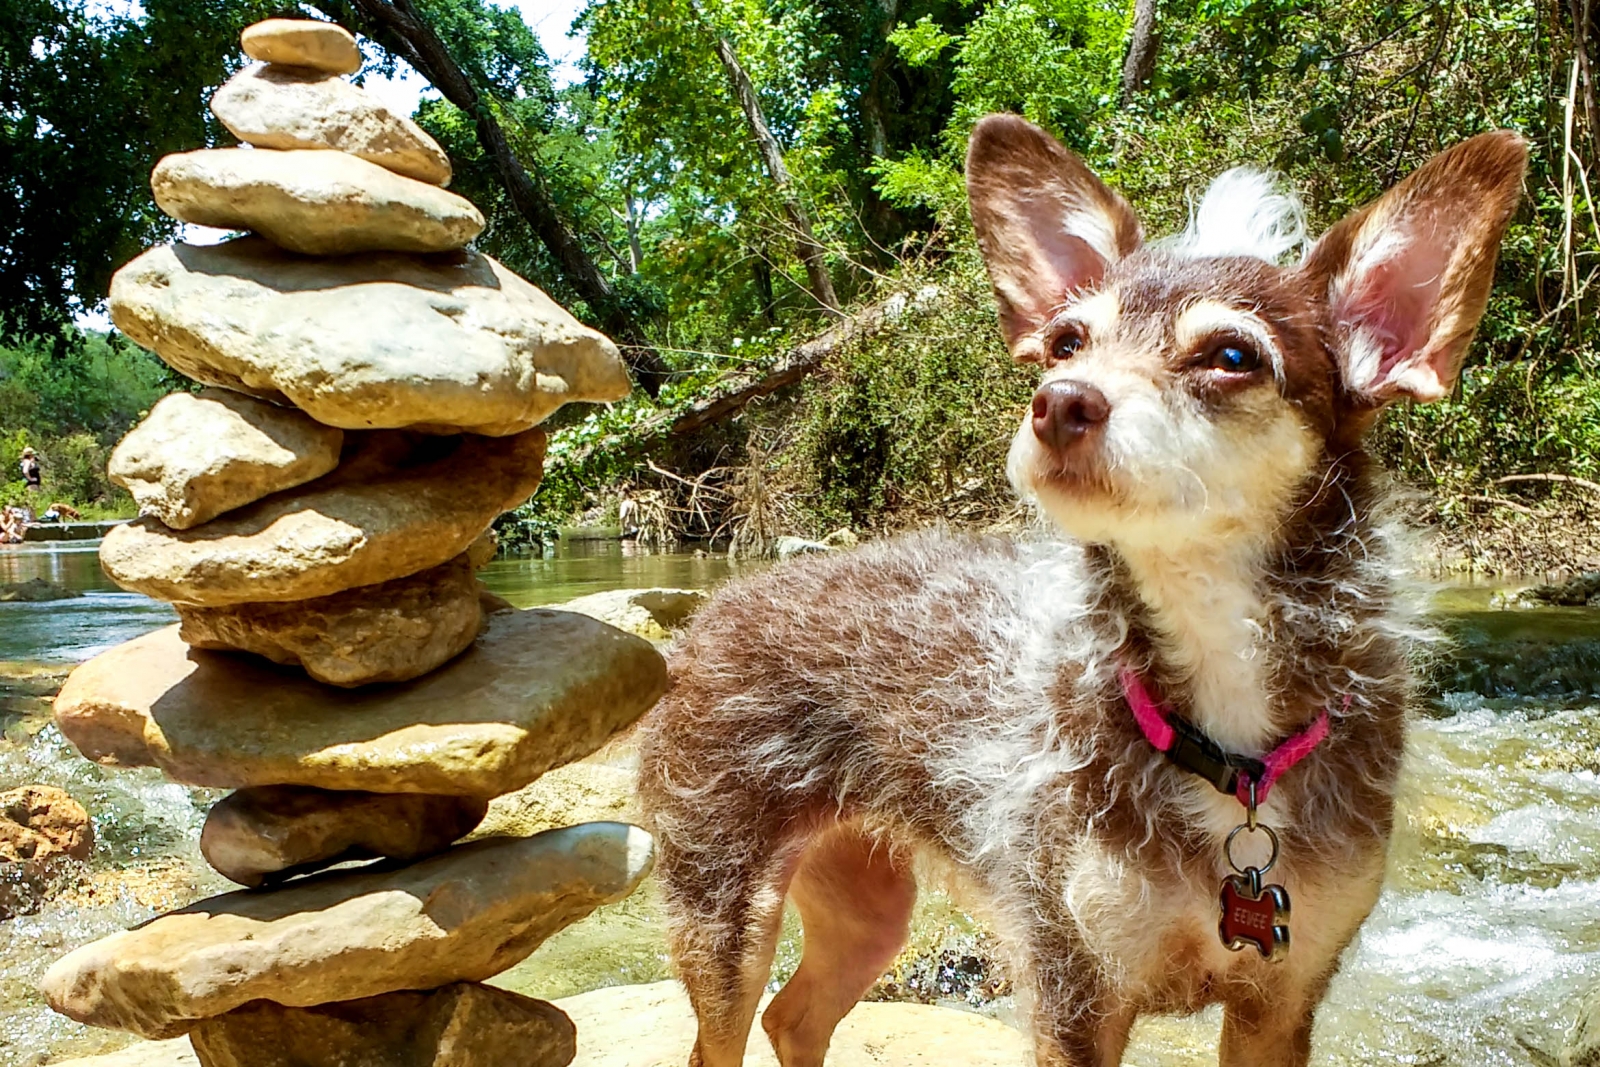 A small dog standing next to a pile of stacked rocks.